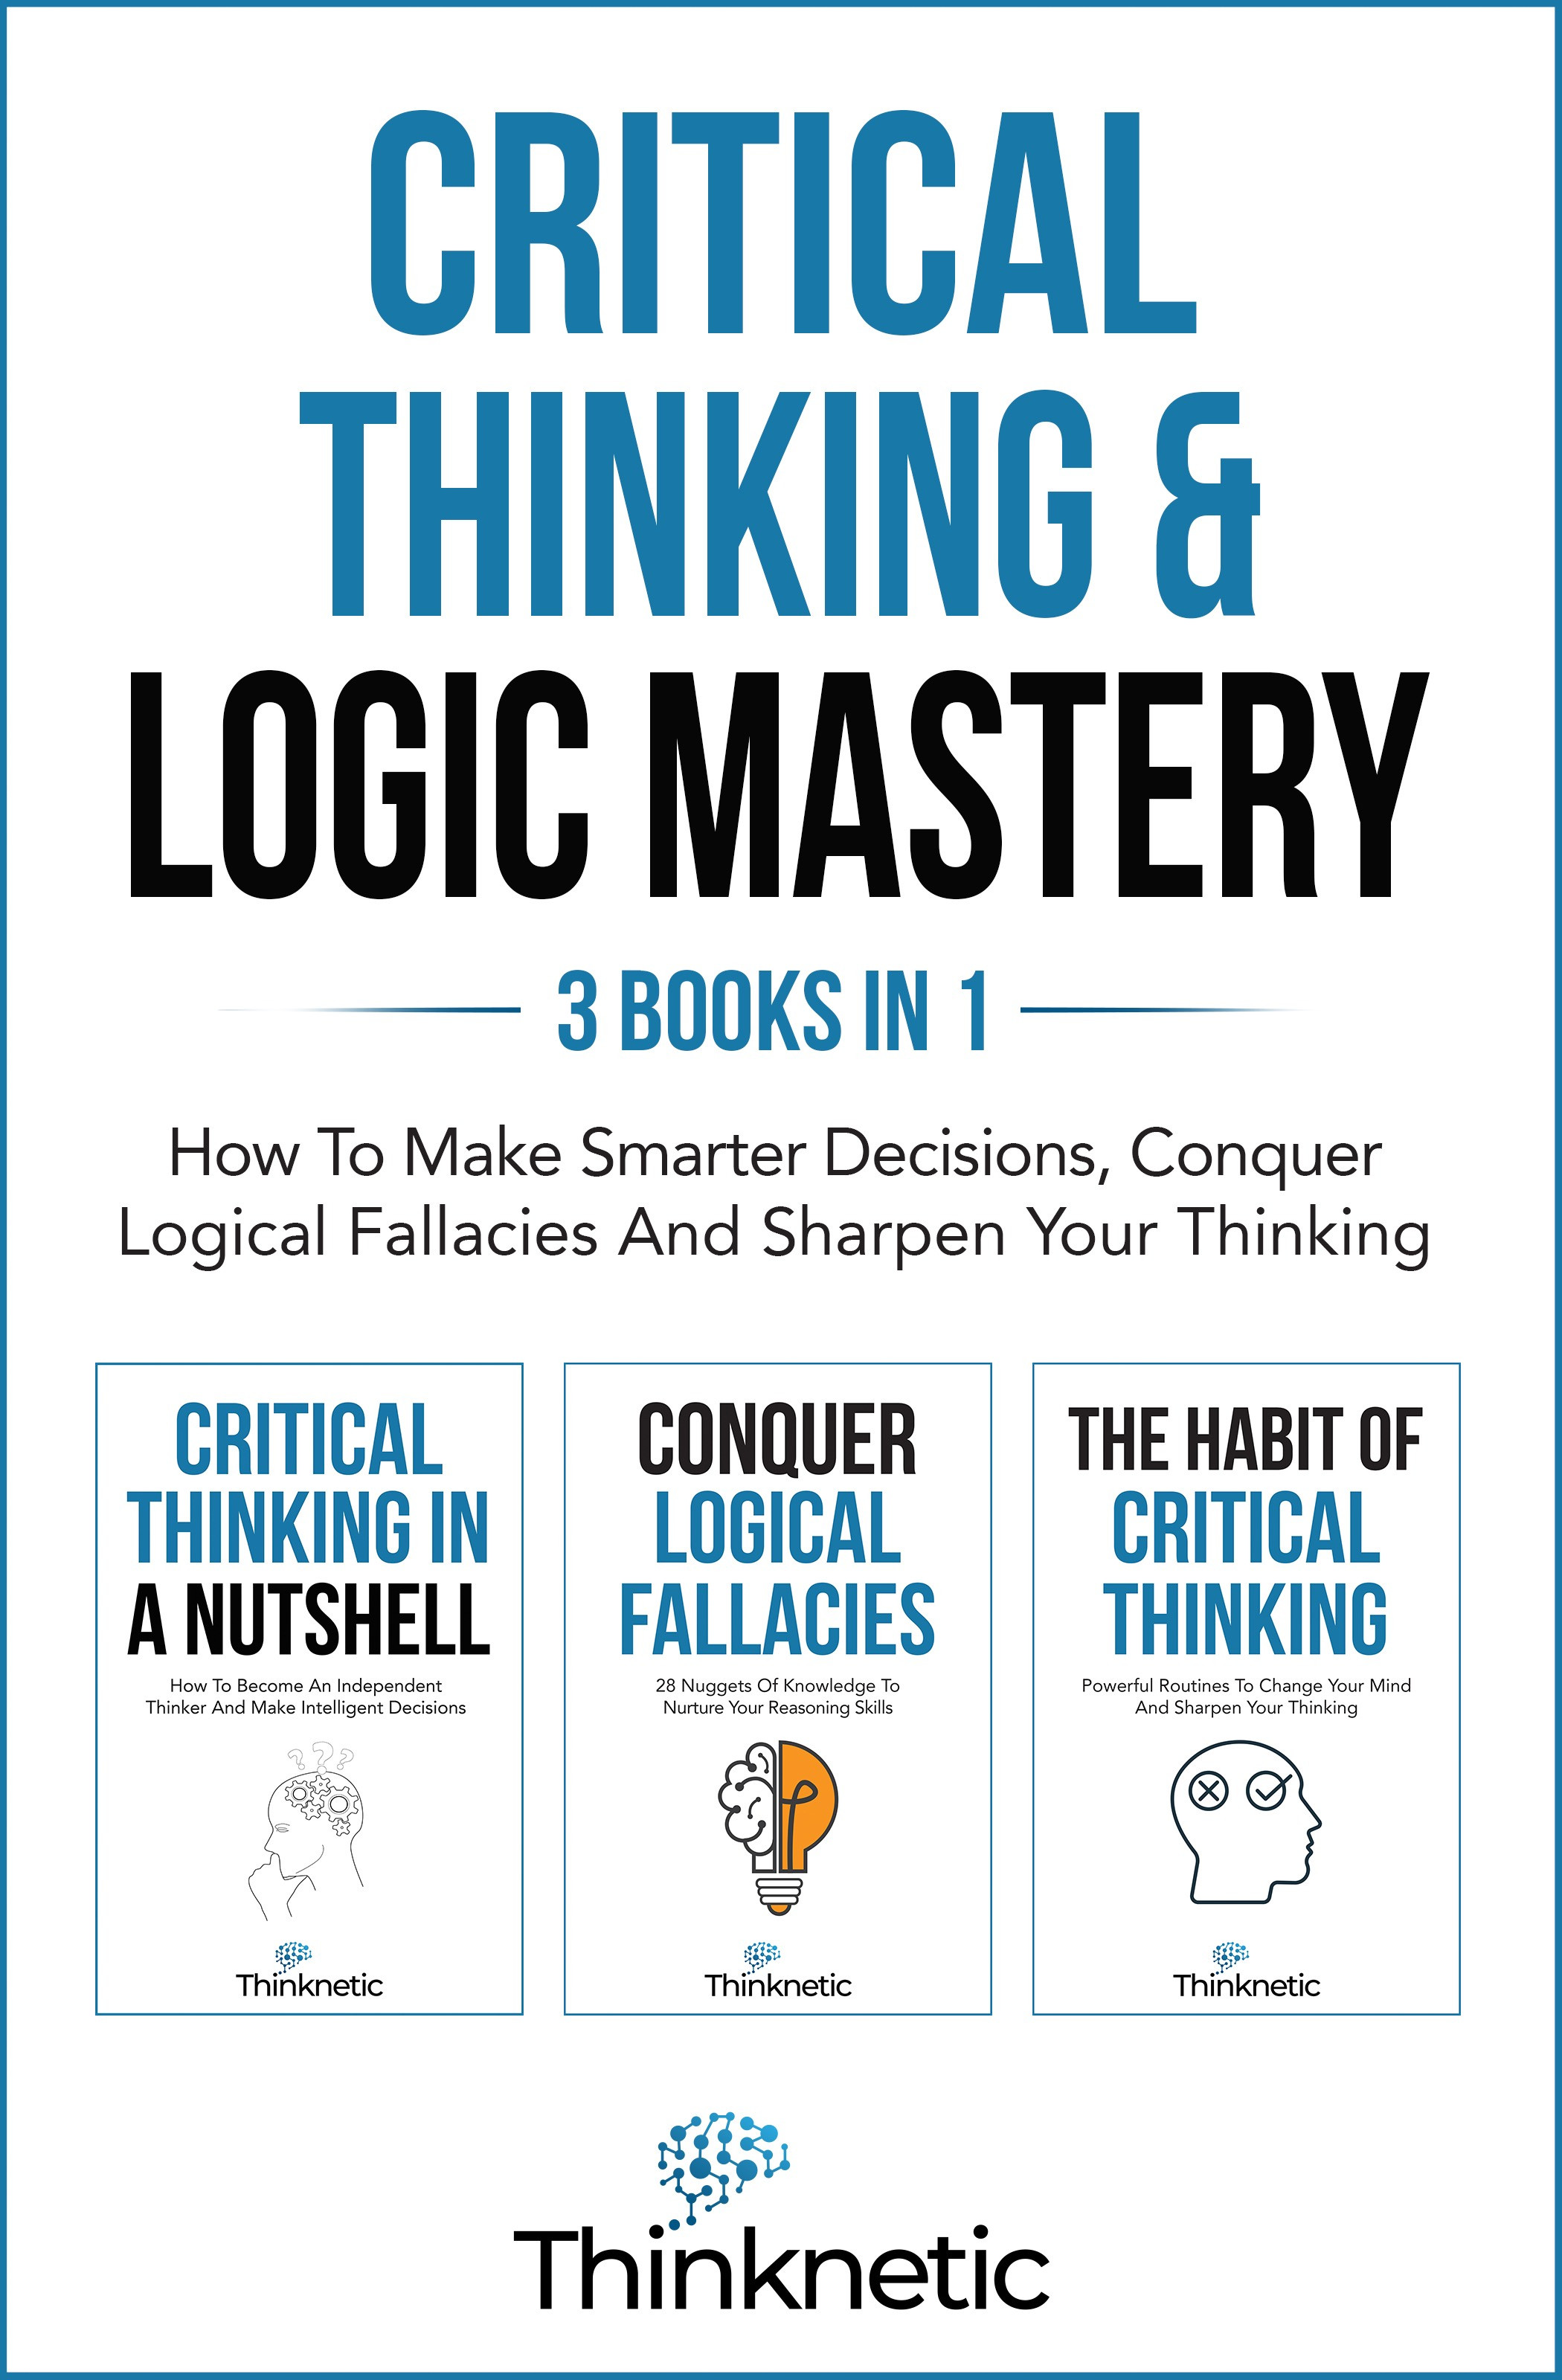 Critical Thinking & Logic Mastery – 3 Books In 1: How To Make Smarter Decisions, Conquer Logical Fallacies And Sharpen Your Thinking